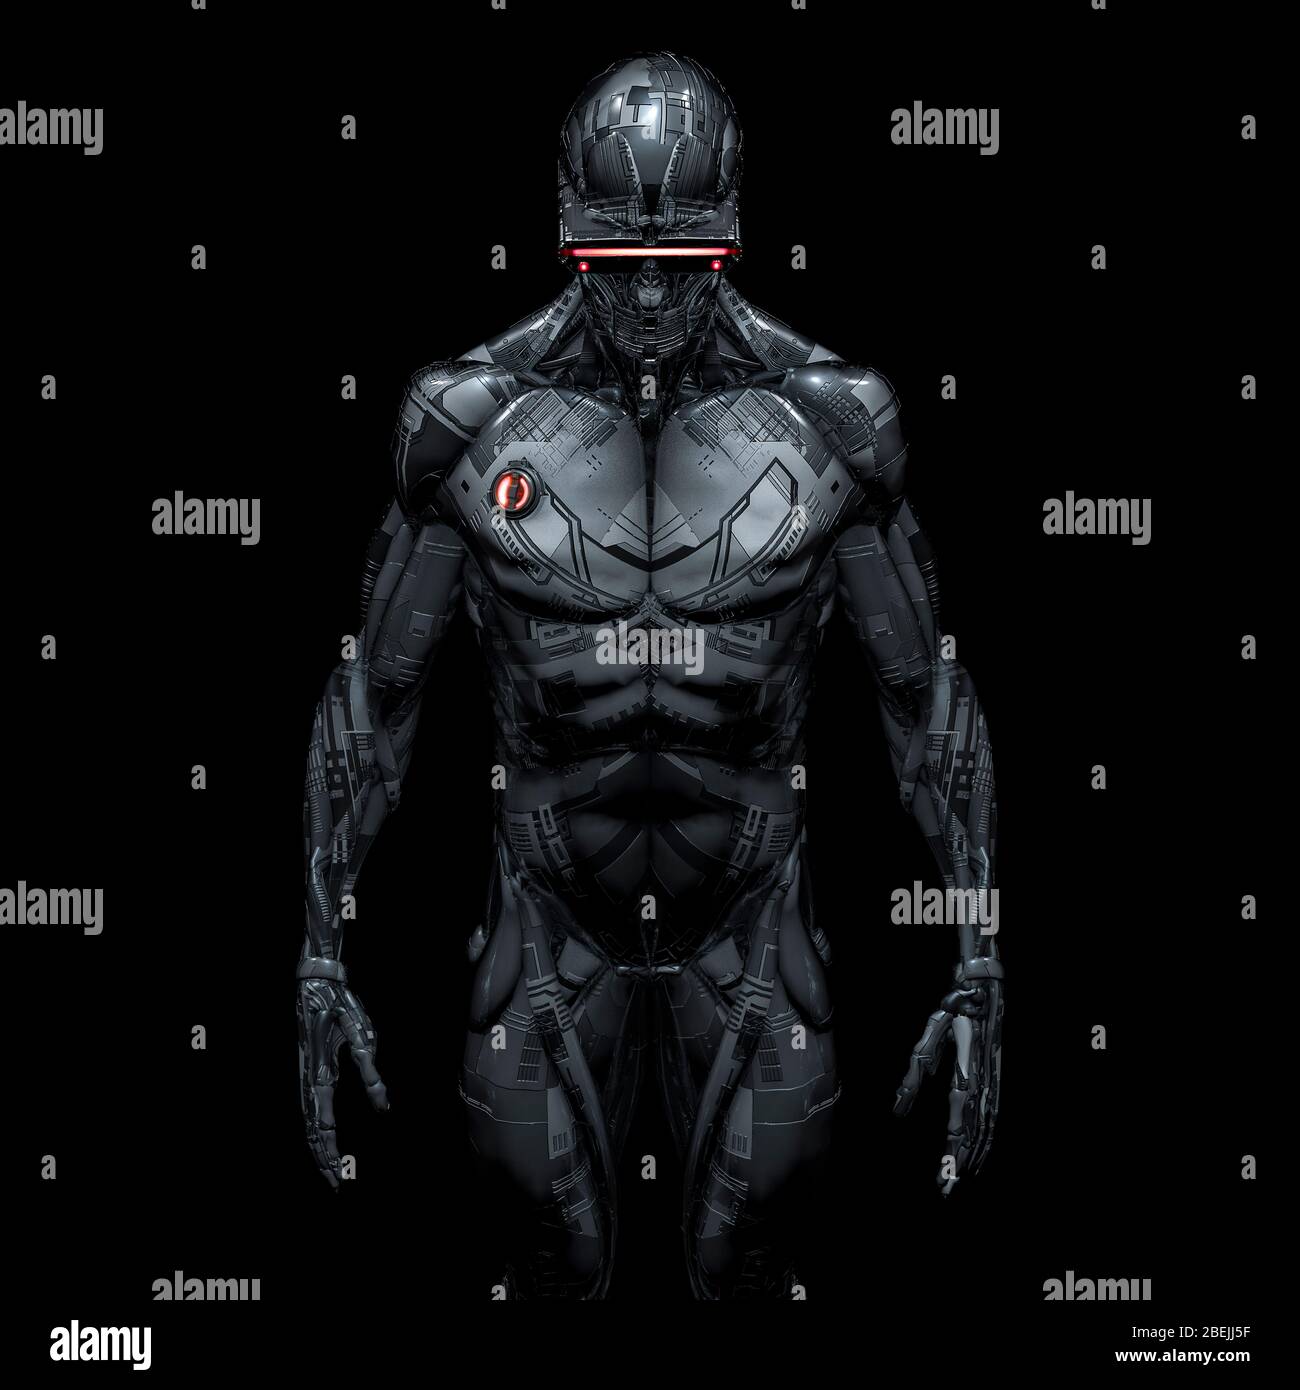 Cyberpunk android portrait / 3D illustration of male science fiction  humanoid robot wearing futuristic glasses isolated on black background  Stock Photo - Alamy